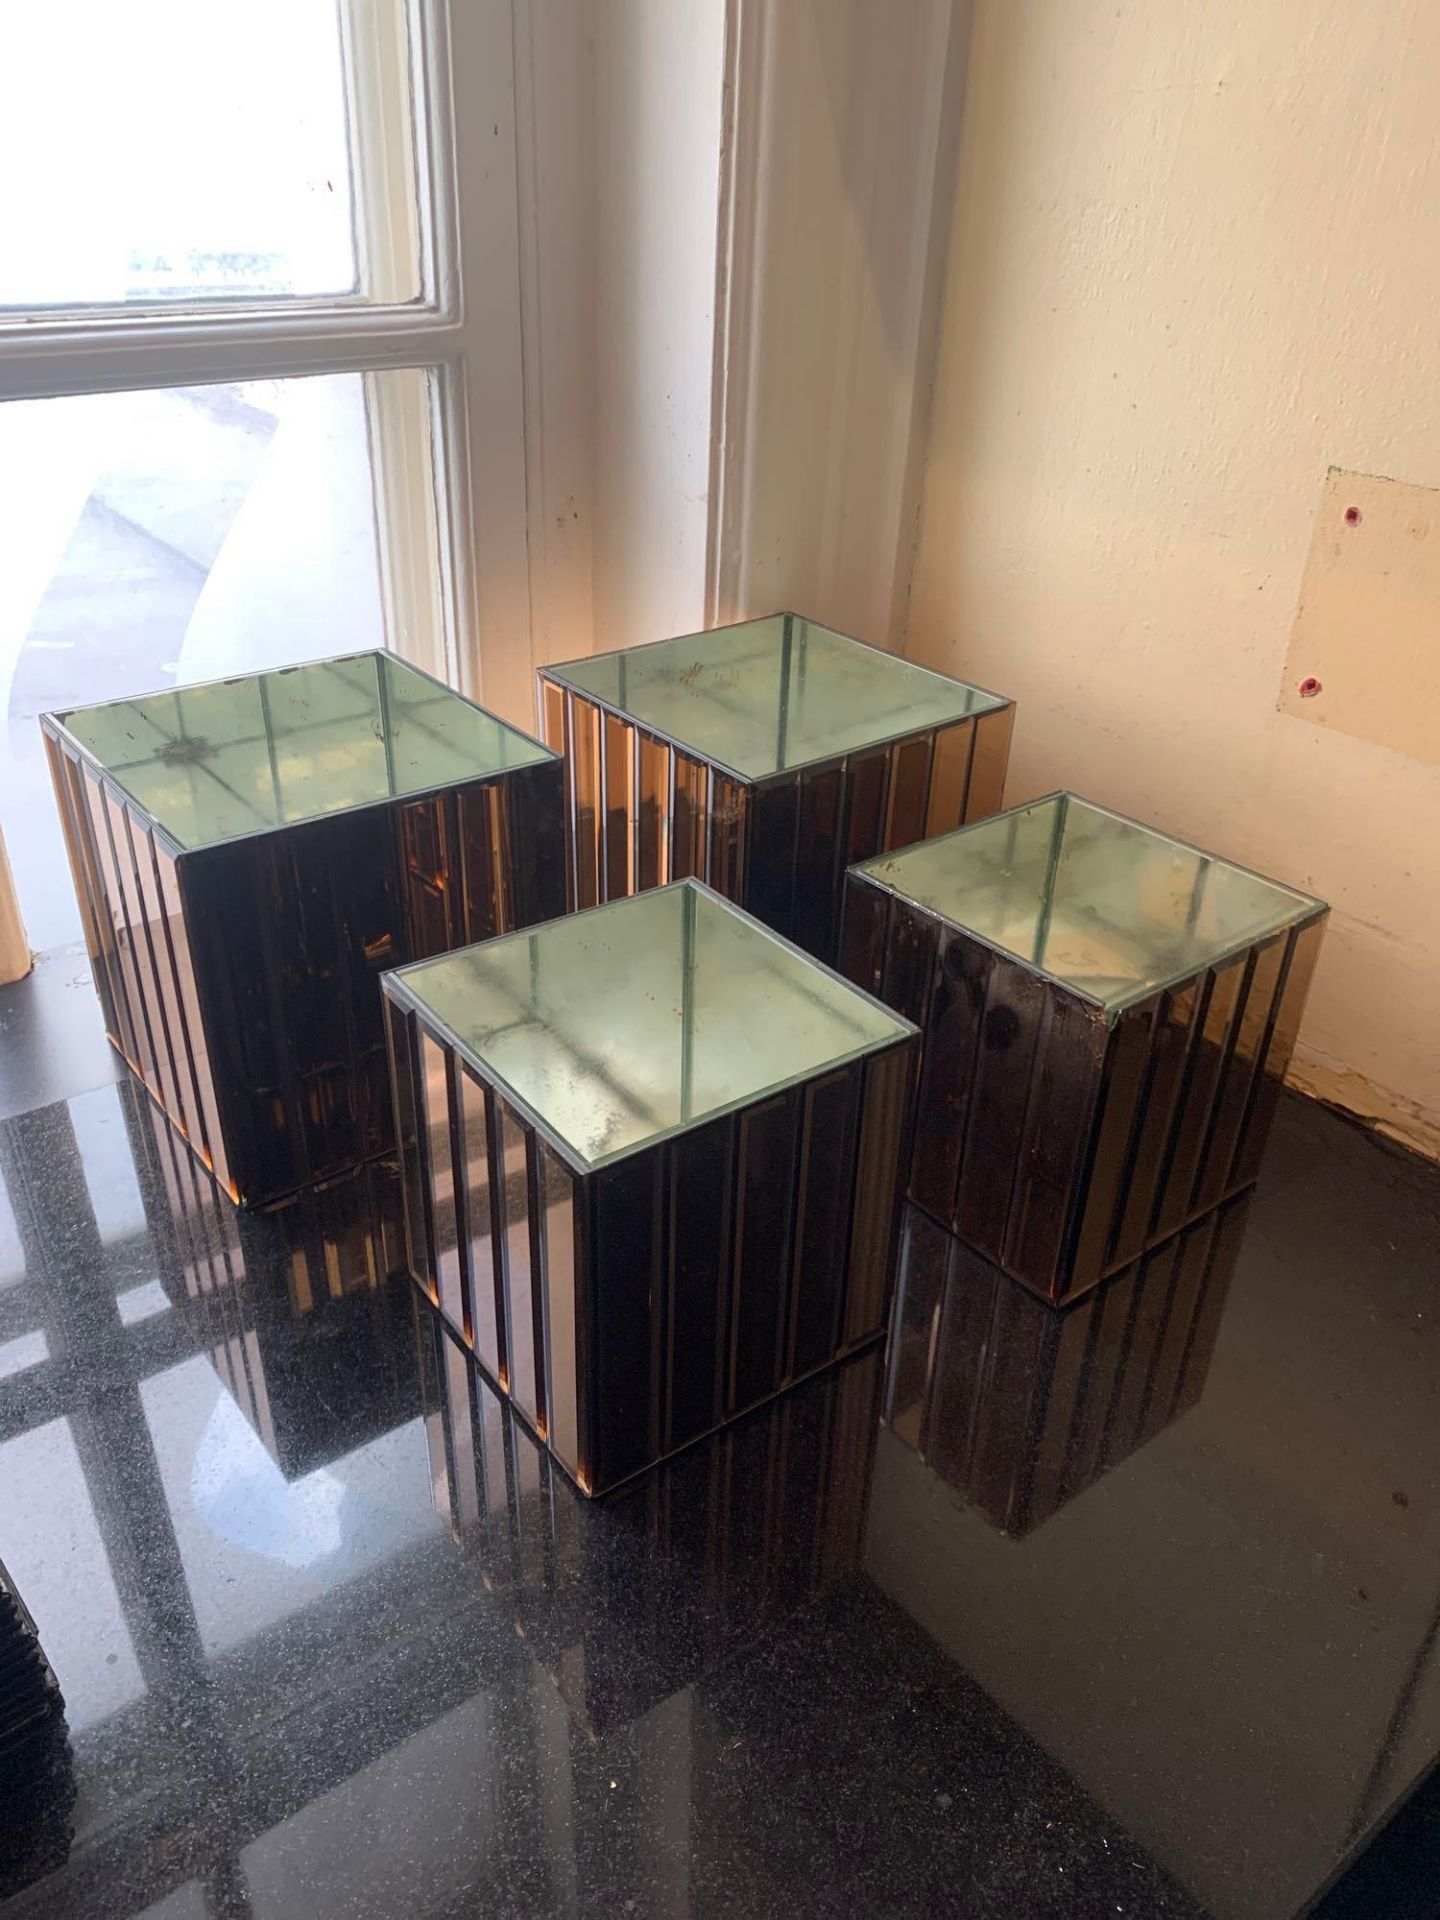 A Set Of 4 x Gold Mirrored Glass Square Planter Vases 2 x 108 x 108 x 108 And 2 x 105 x 105 x 105mm